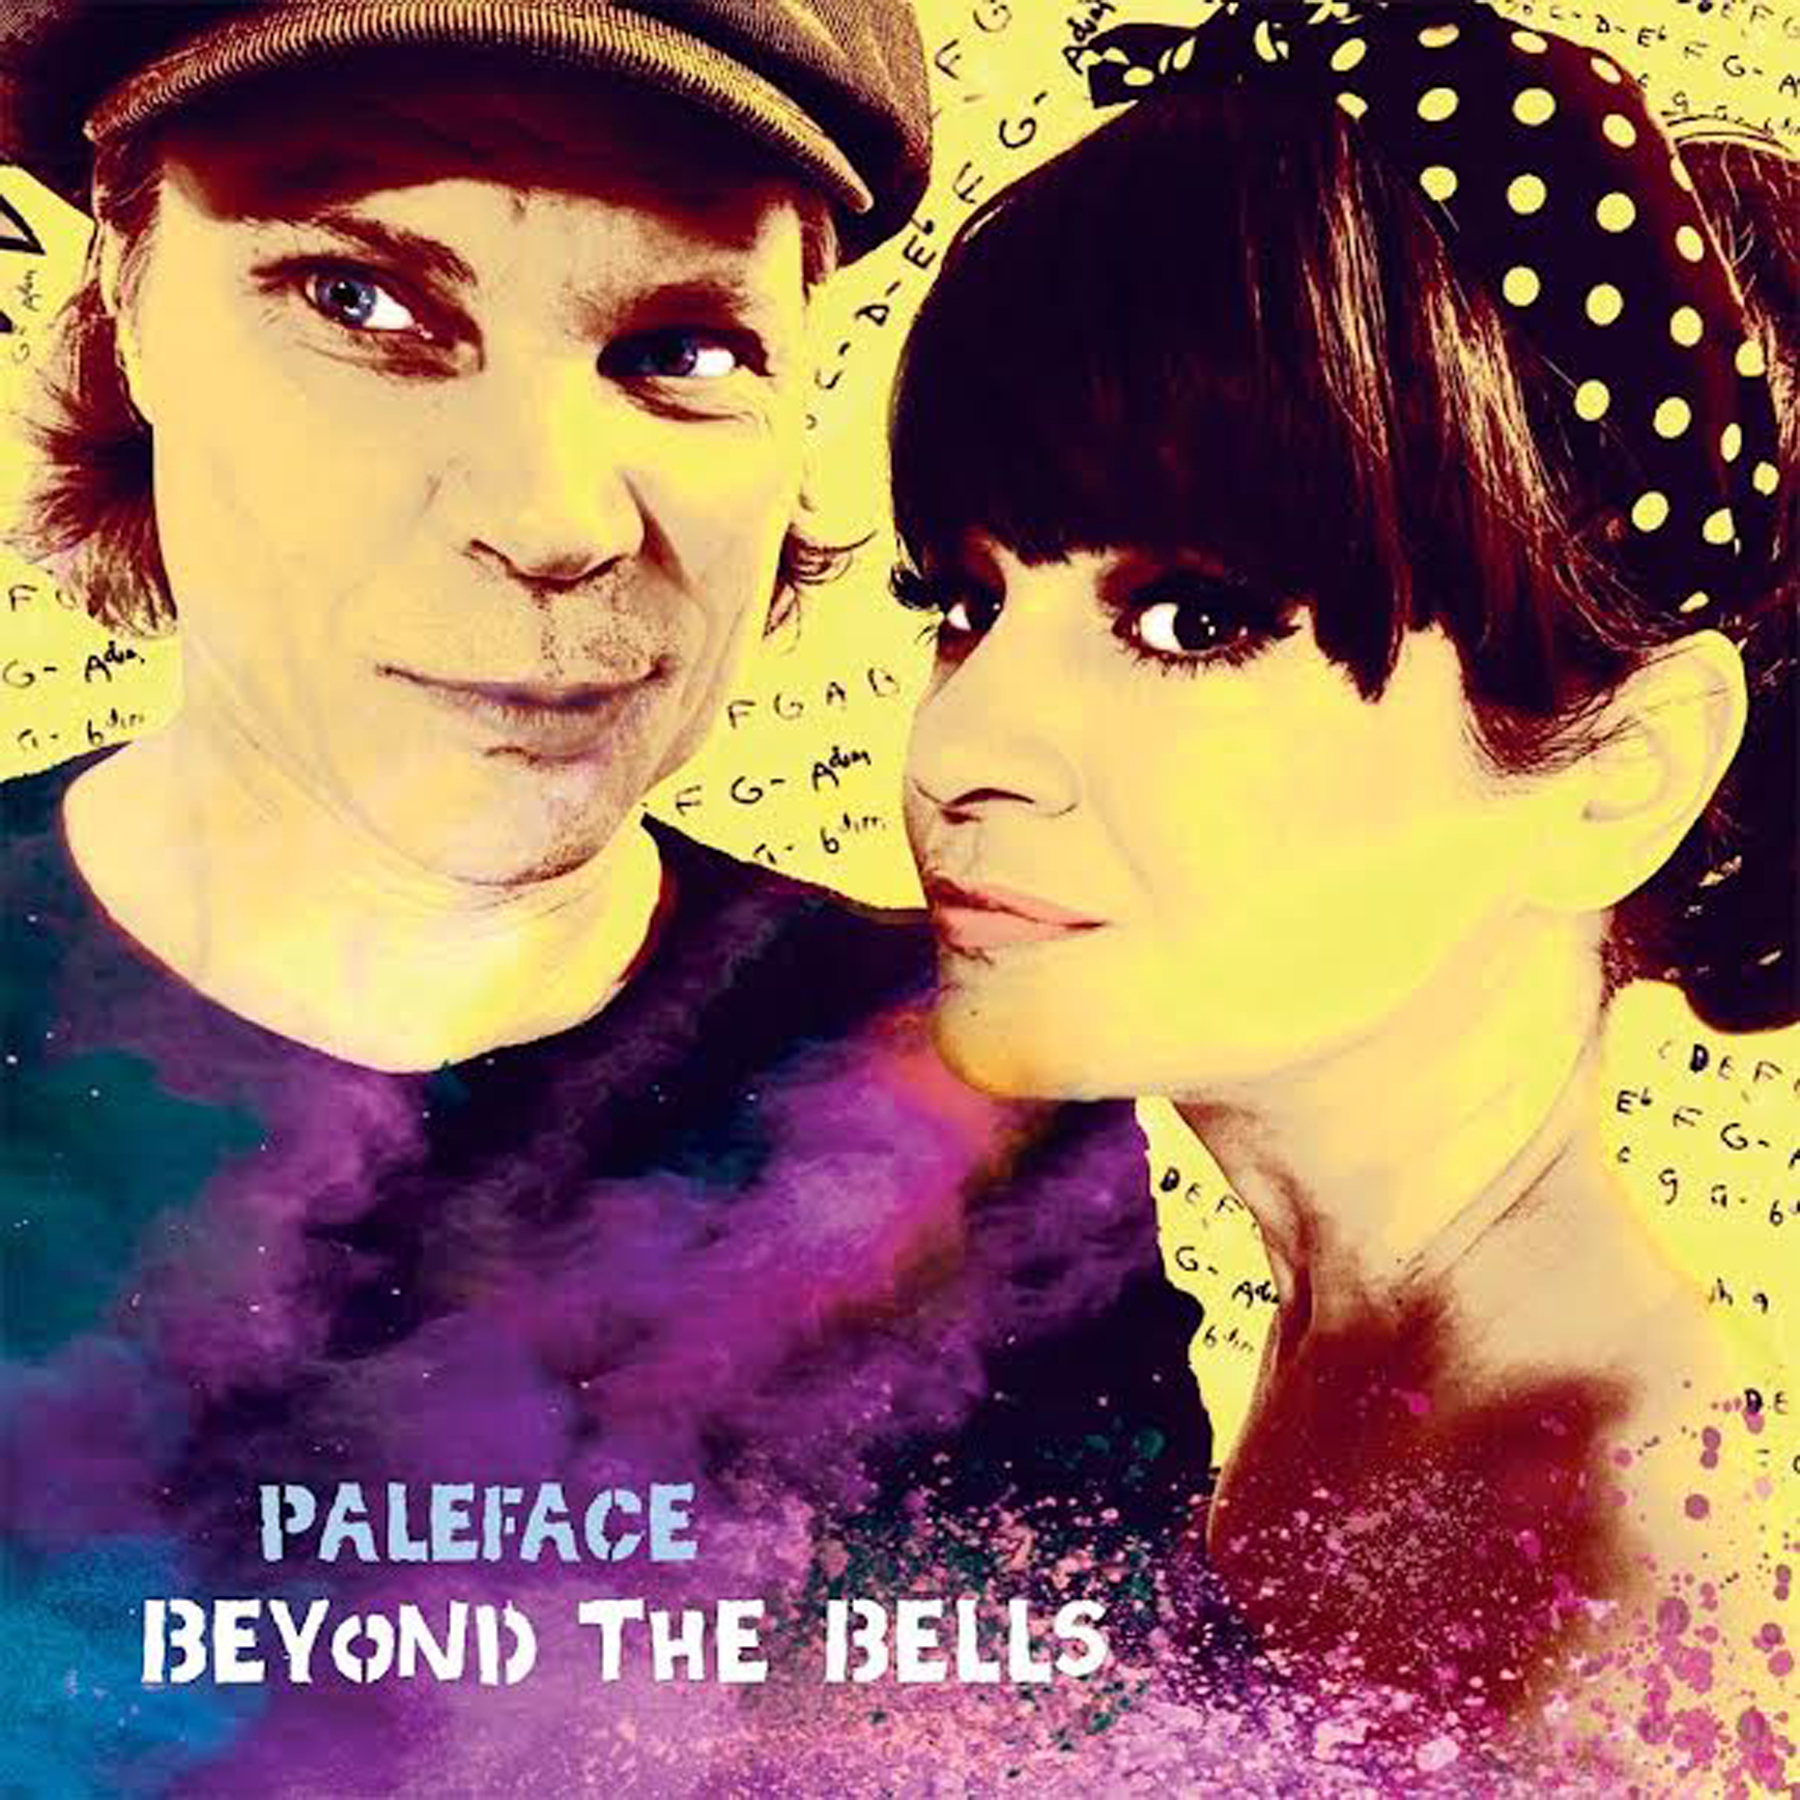 Filtered image of Paleface and Mo together. Headshots in which both are slightly smiling and looking left of the viewer.